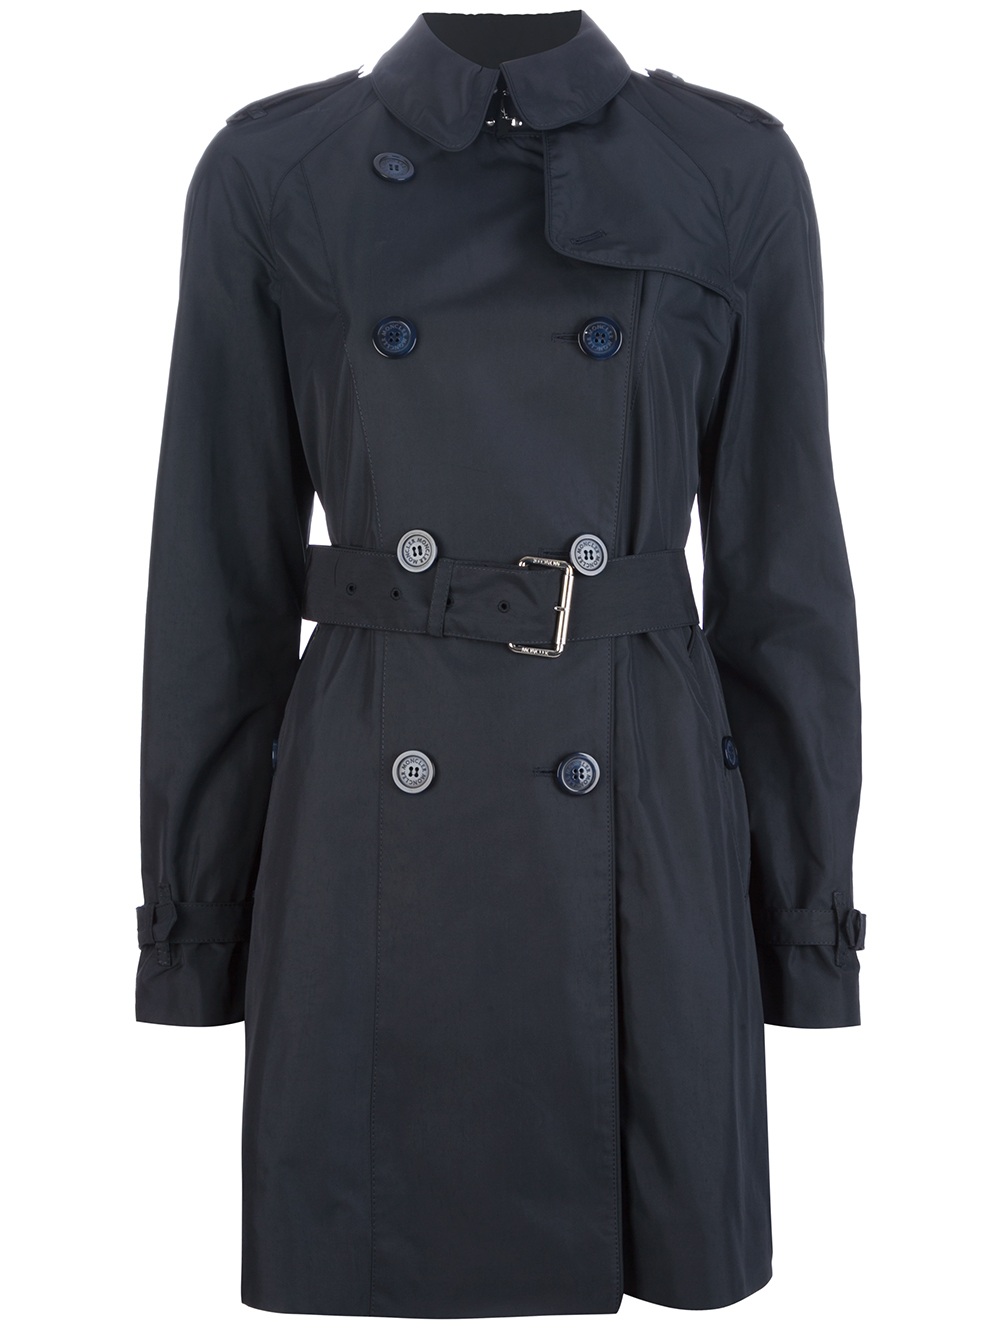 Lyst - Moncler Lorraine Trench Coat in Blue